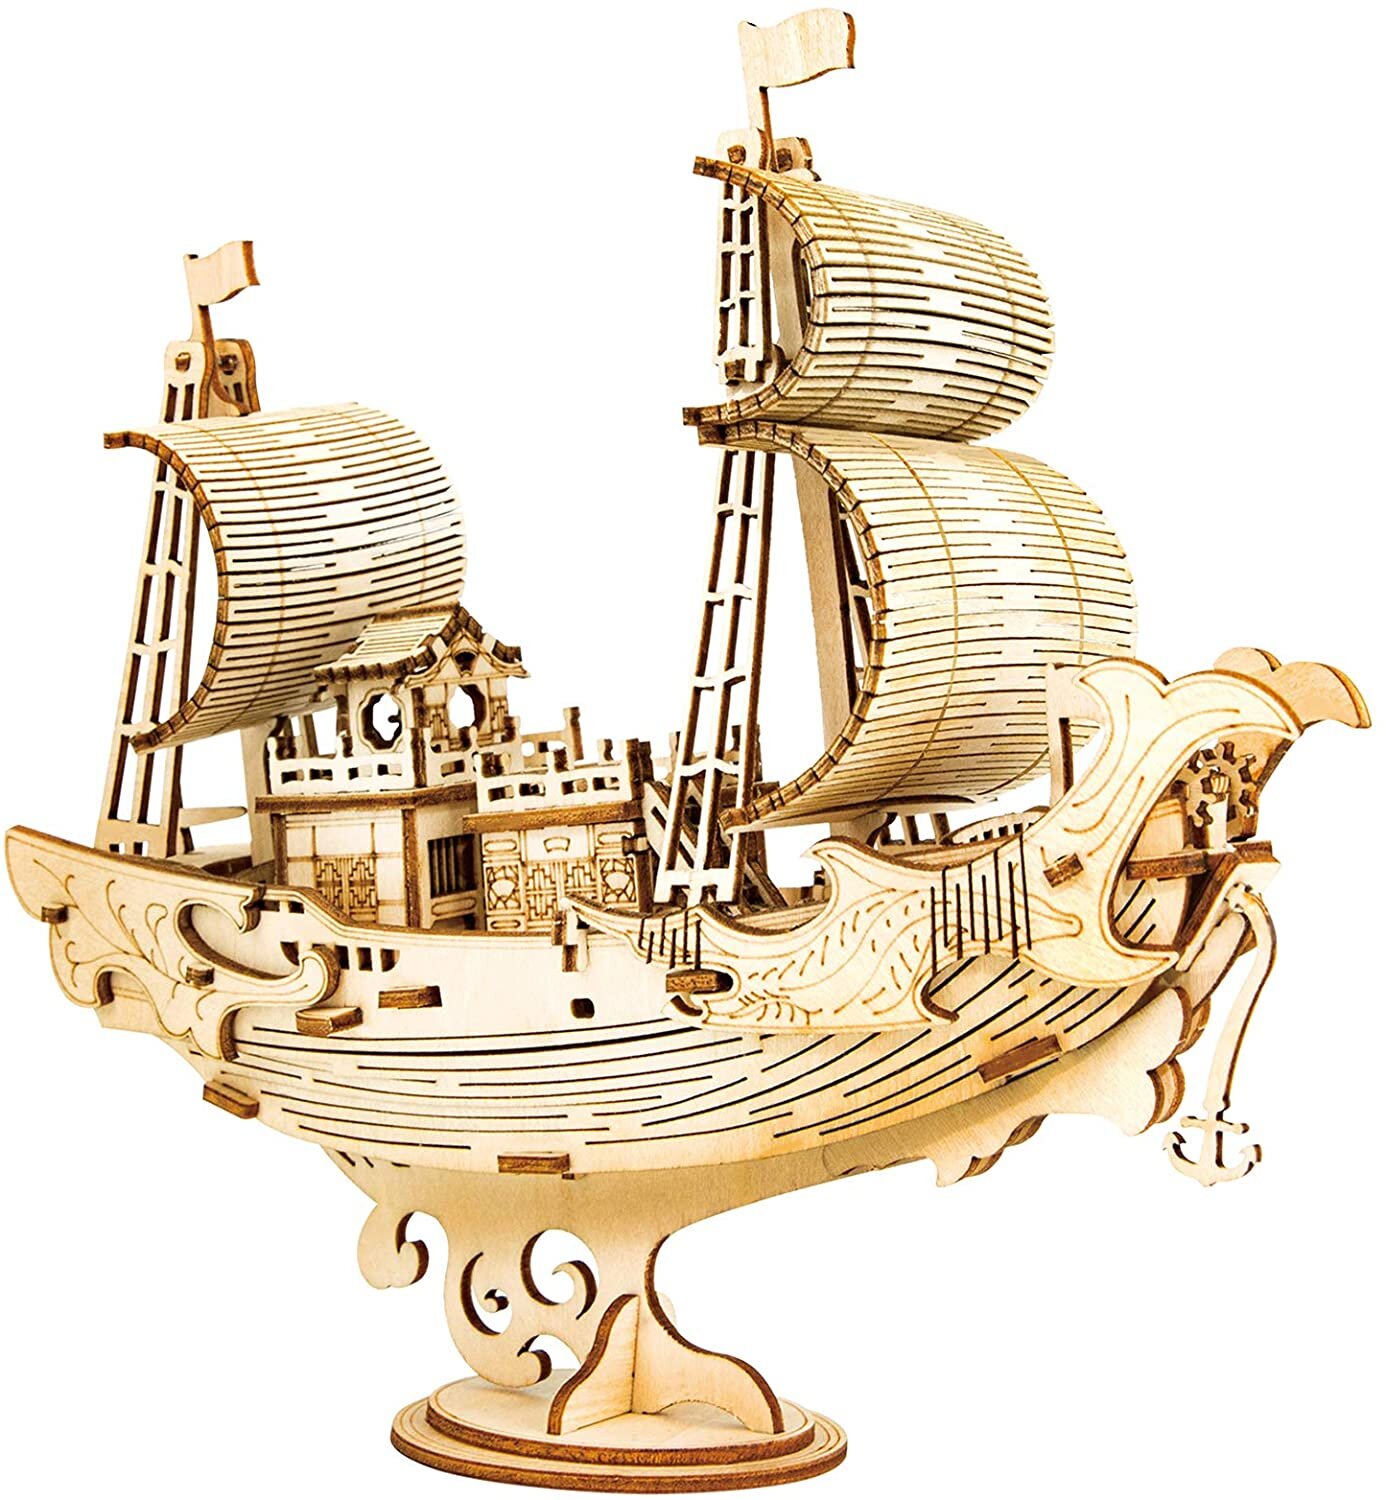 3D Wooden Jigsaw Puzzle Sailboat Model Woodcraft Kids Game Kit DIY Toy H